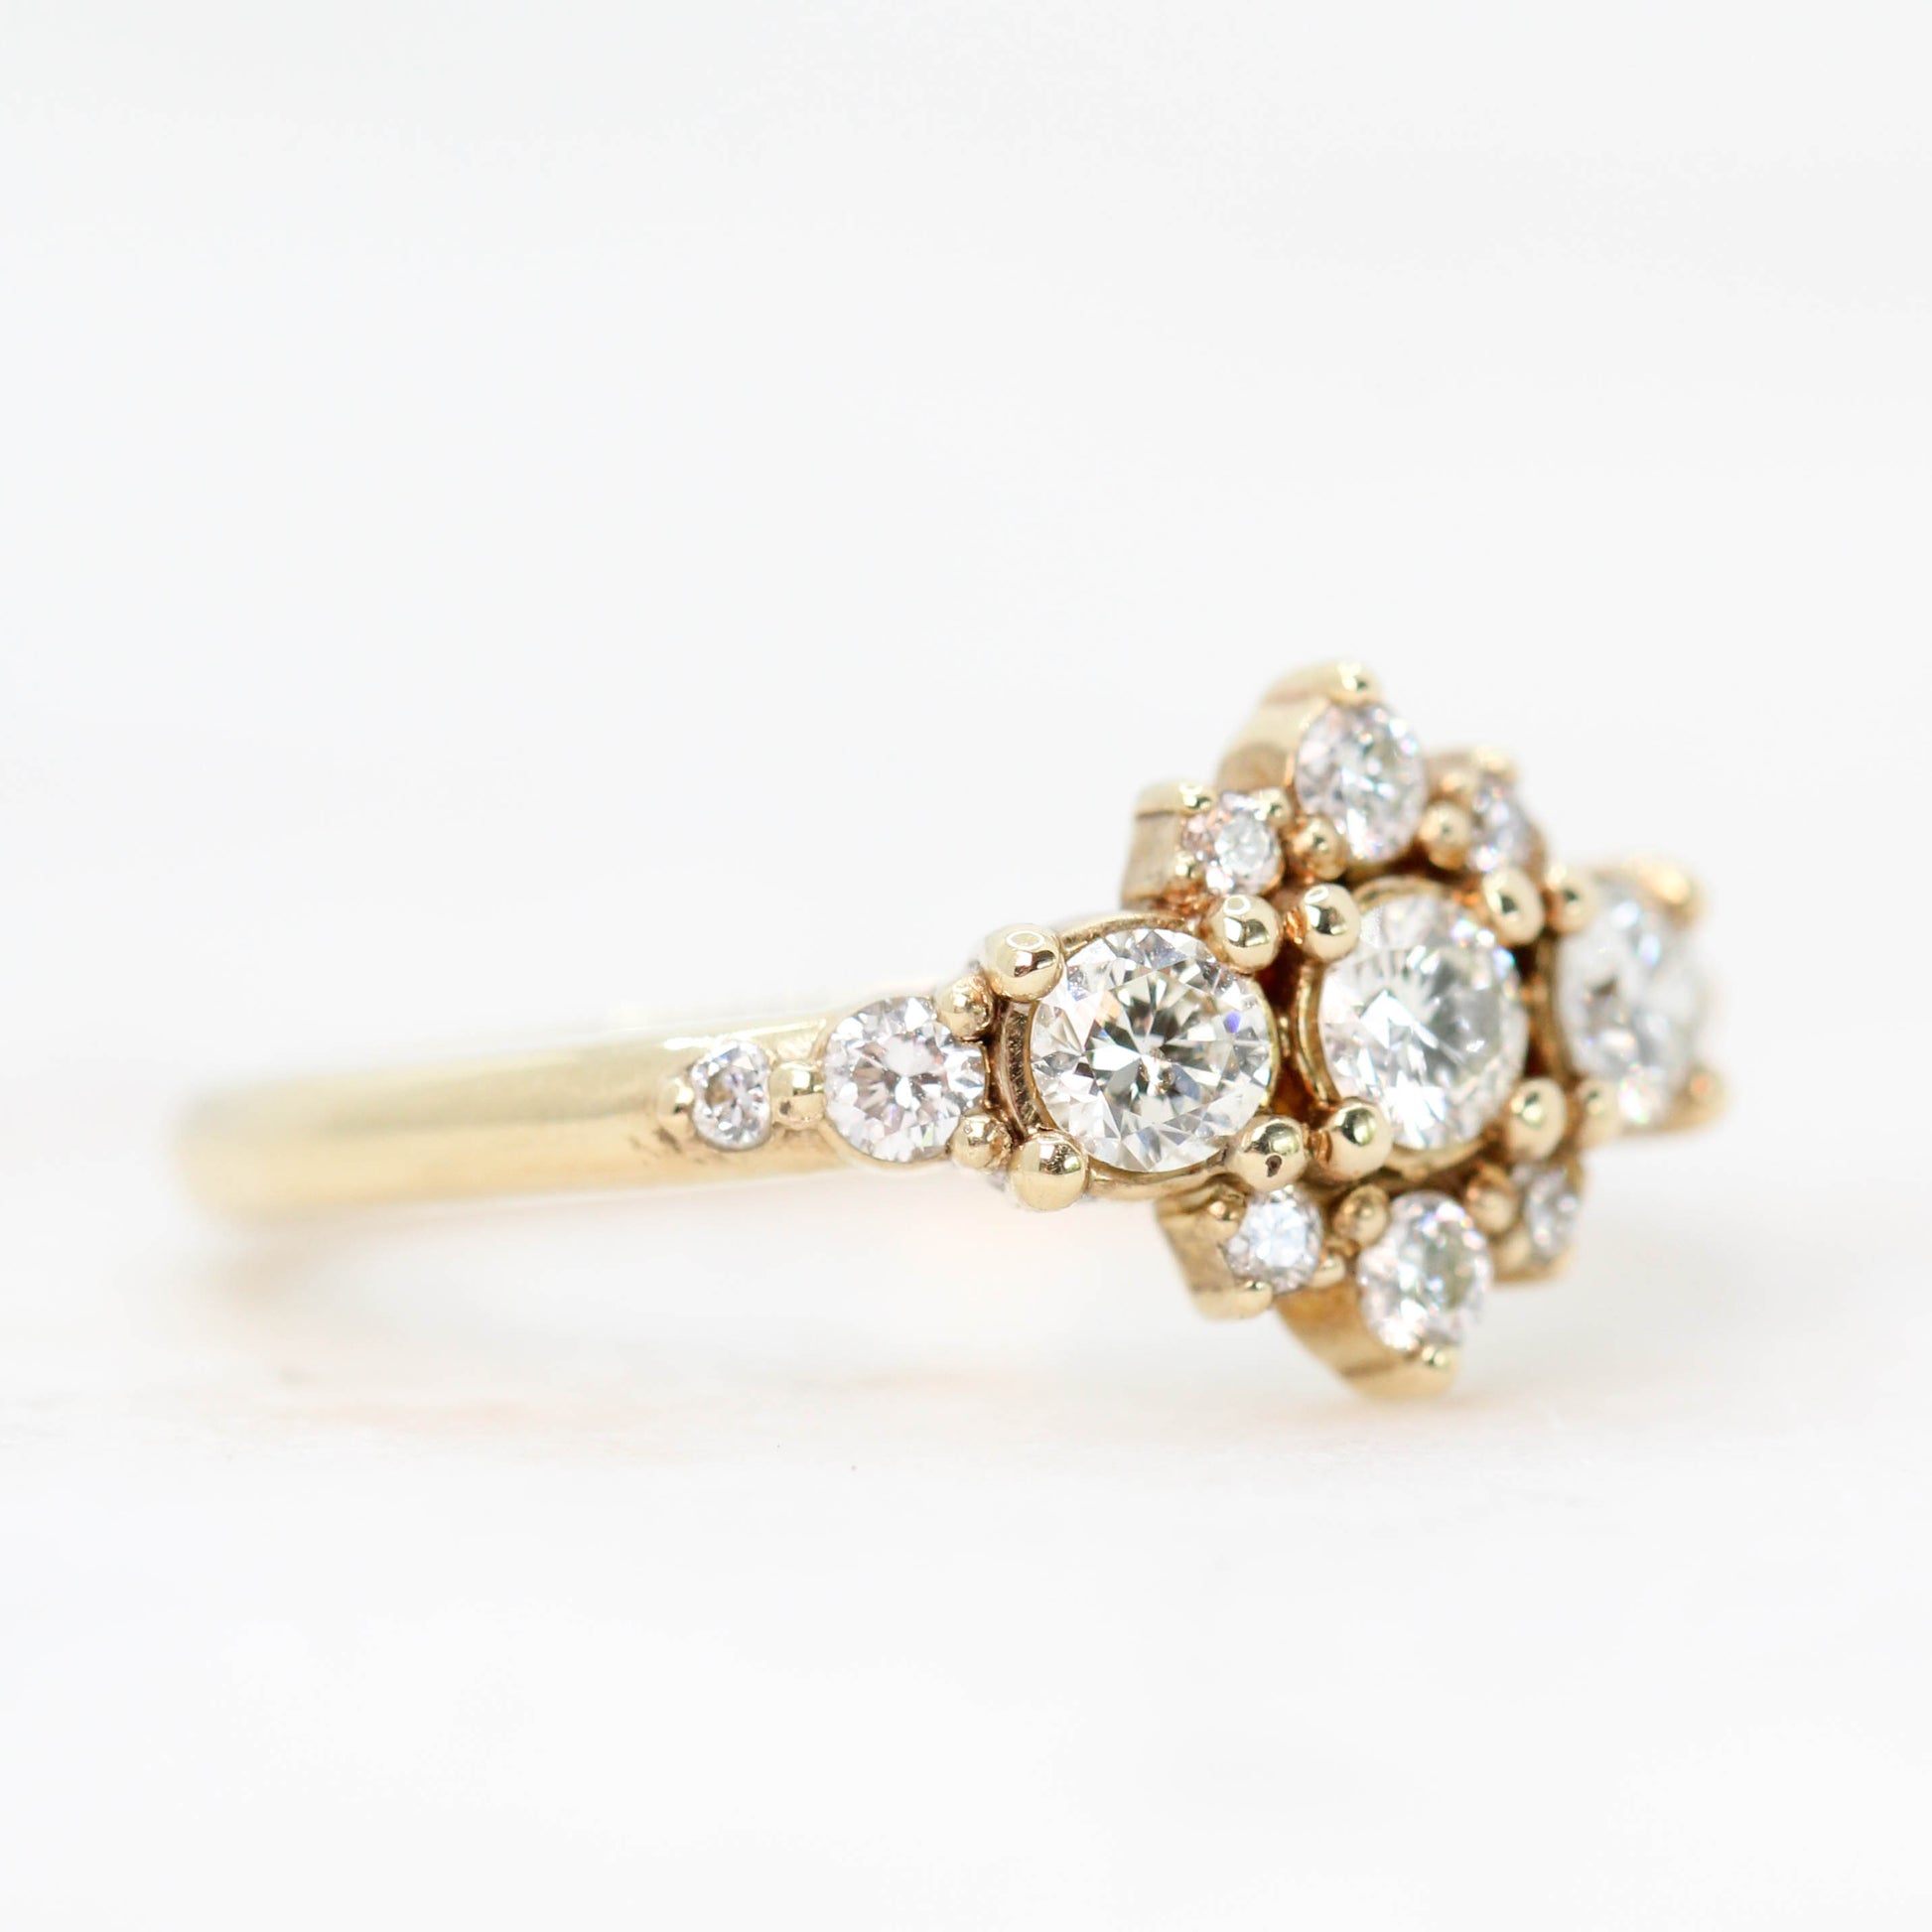 Victoria Ring with Three Round White Diamonds and White Accent Diamonds in 14k Yellow Gold - Ready to Size and Ship - Midwinter Co. Alternative Bridal Rings and Modern Fine Jewelry